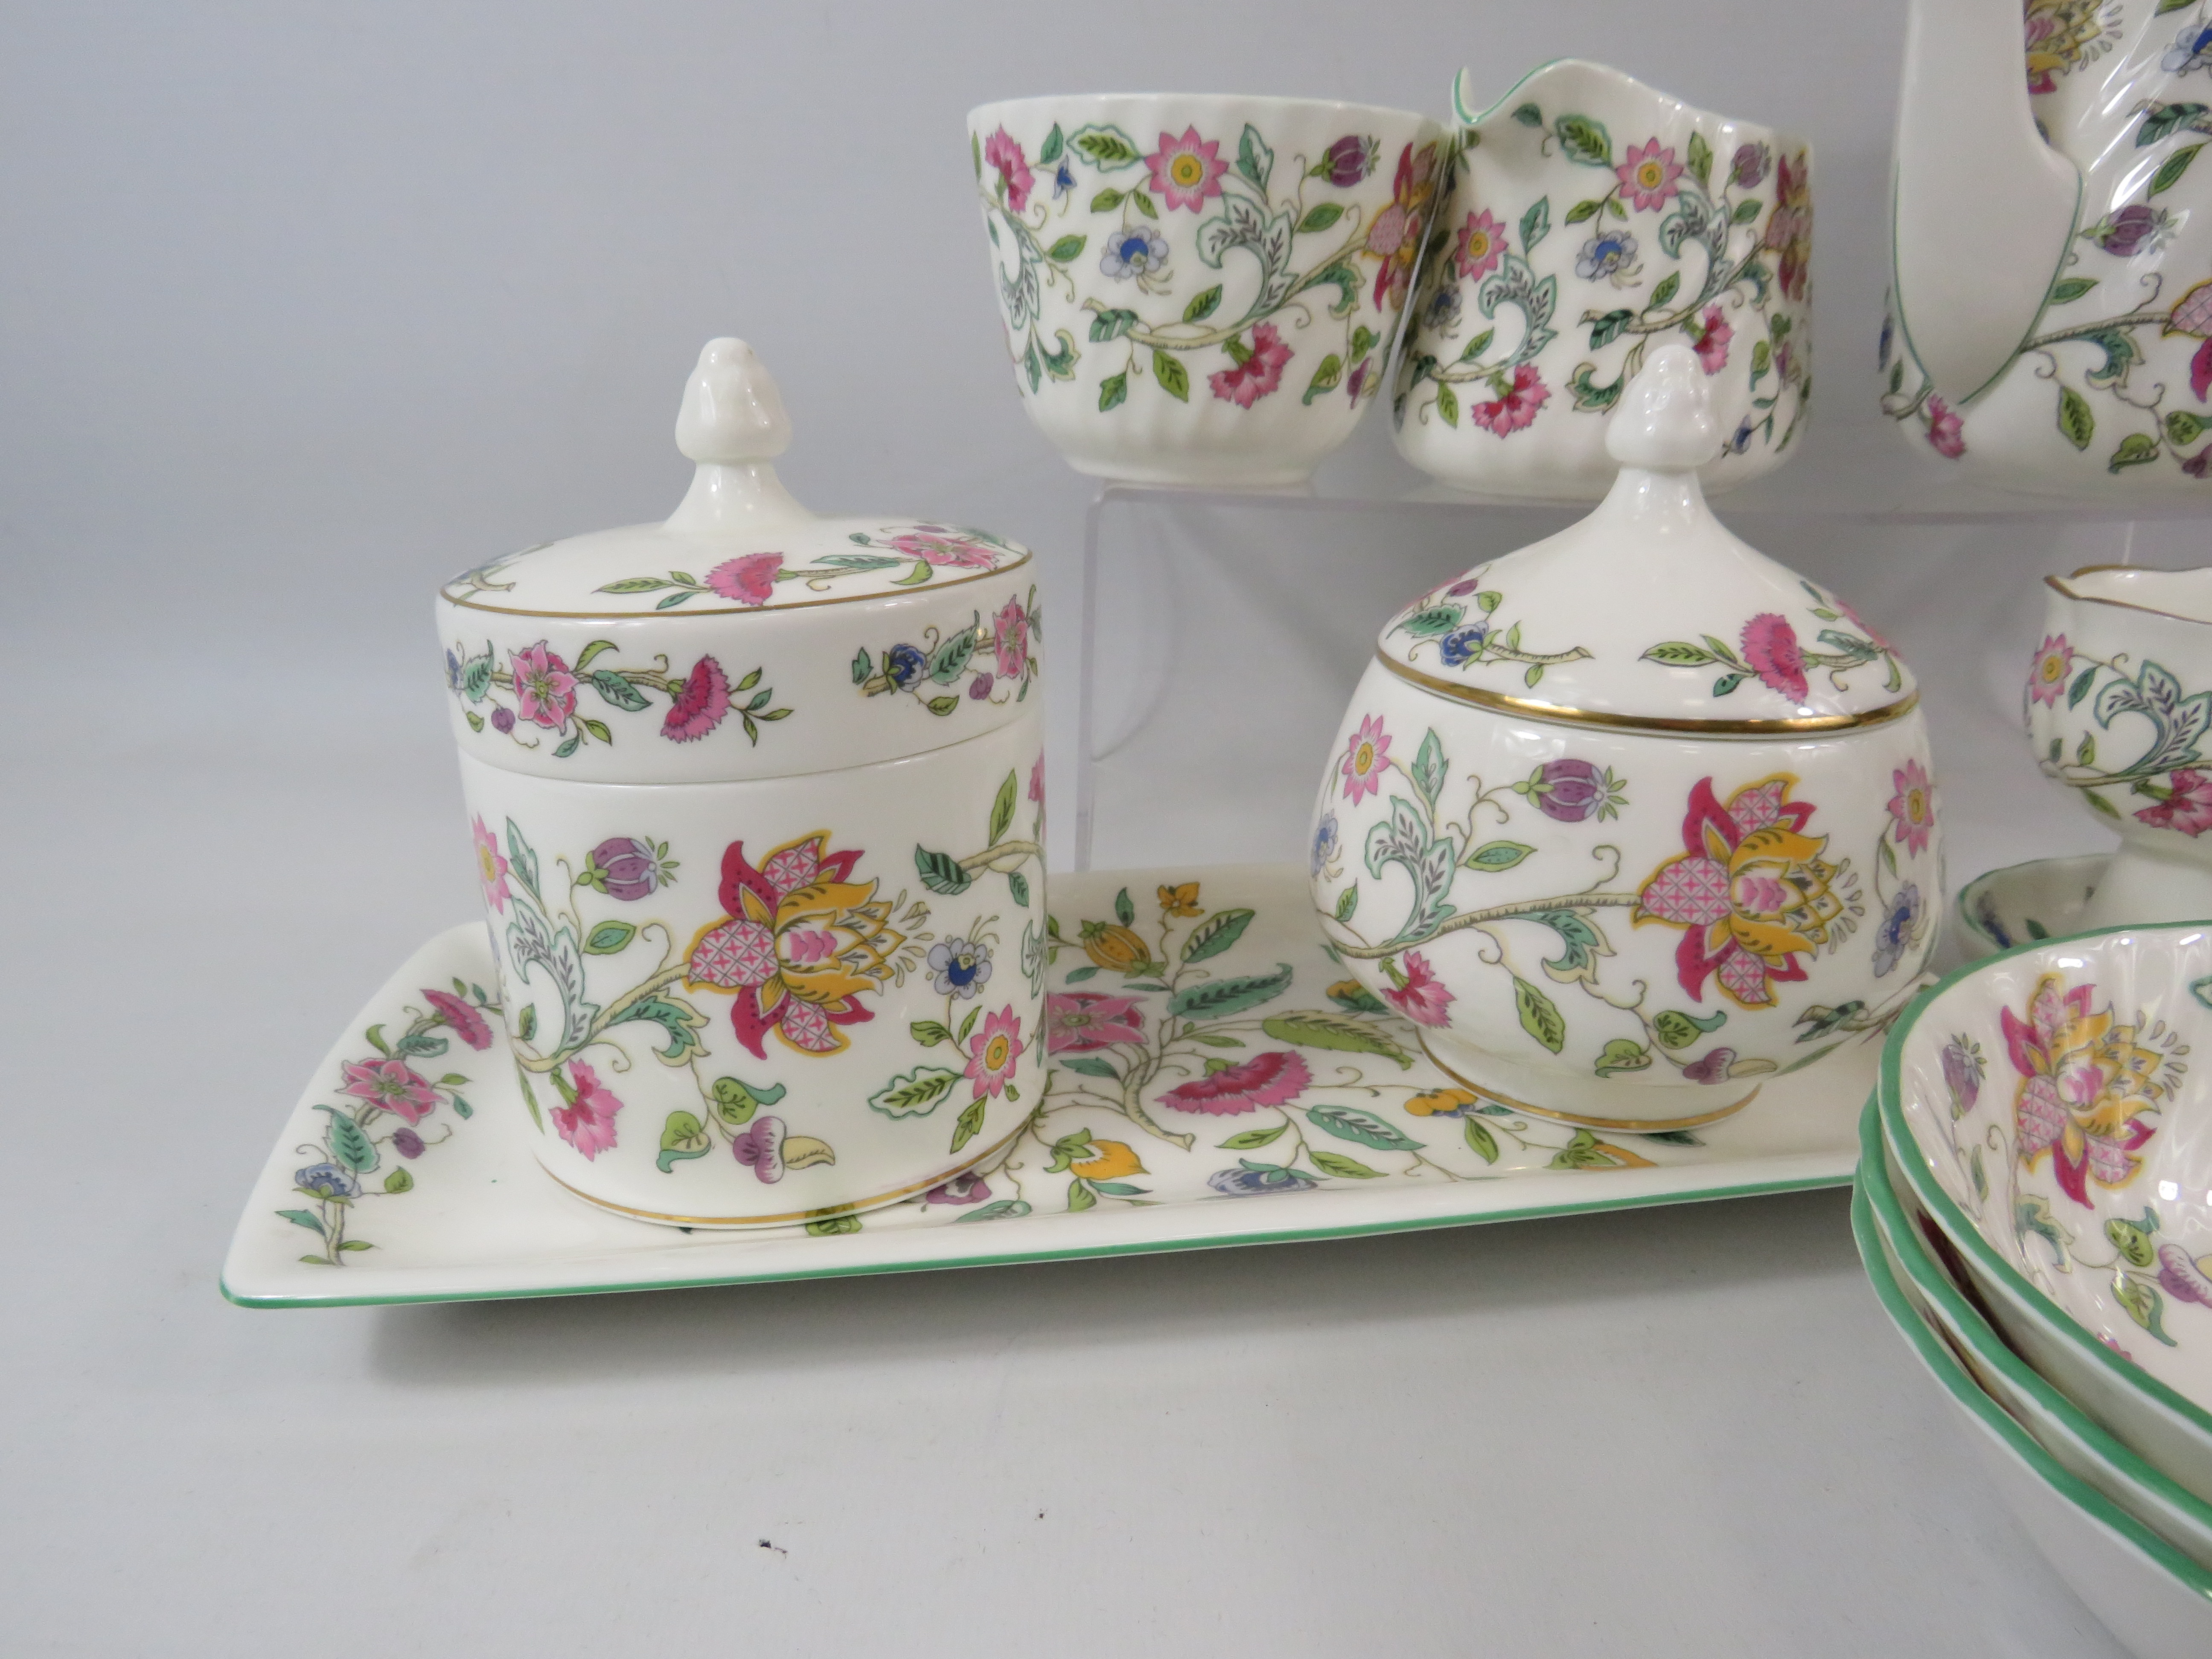 13 Pieces of Minton Haddon hall including teapot, bowls, lidded jars etc. - Image 4 of 4